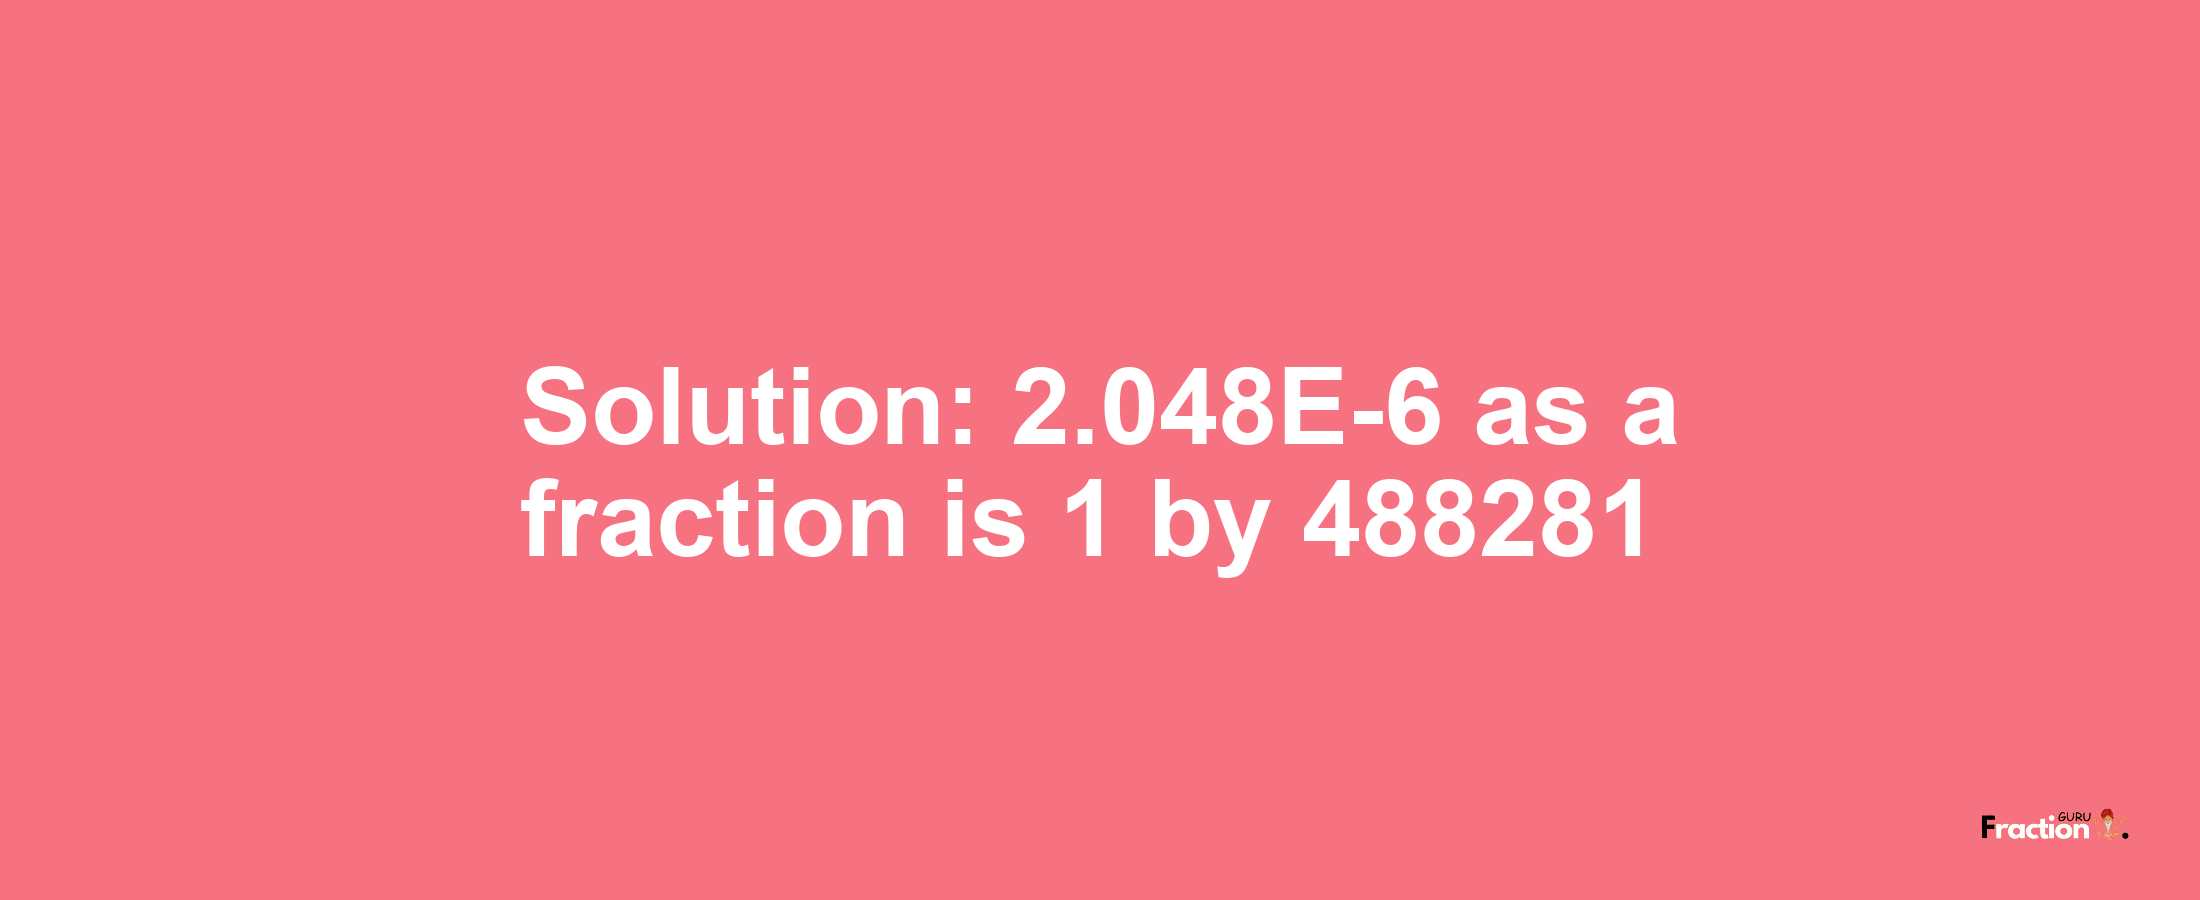 Solution:2.048E-6 as a fraction is 1/488281